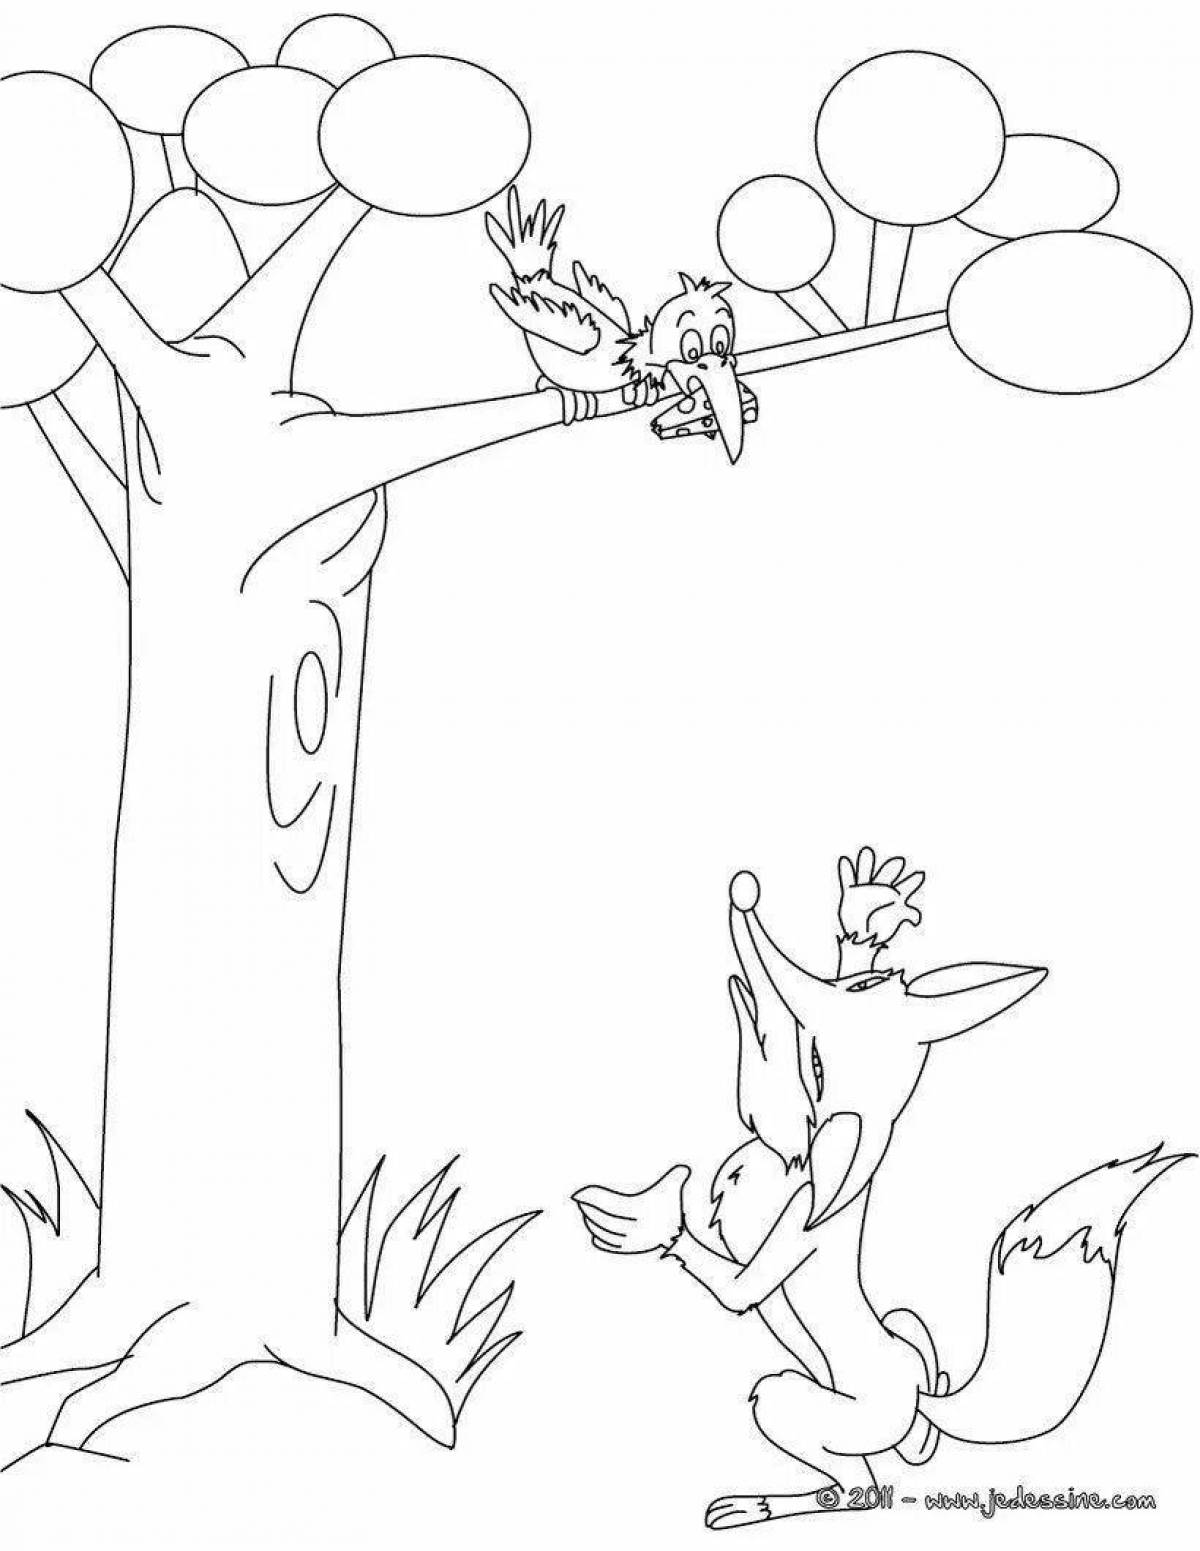 Animated fox and crow coloring page